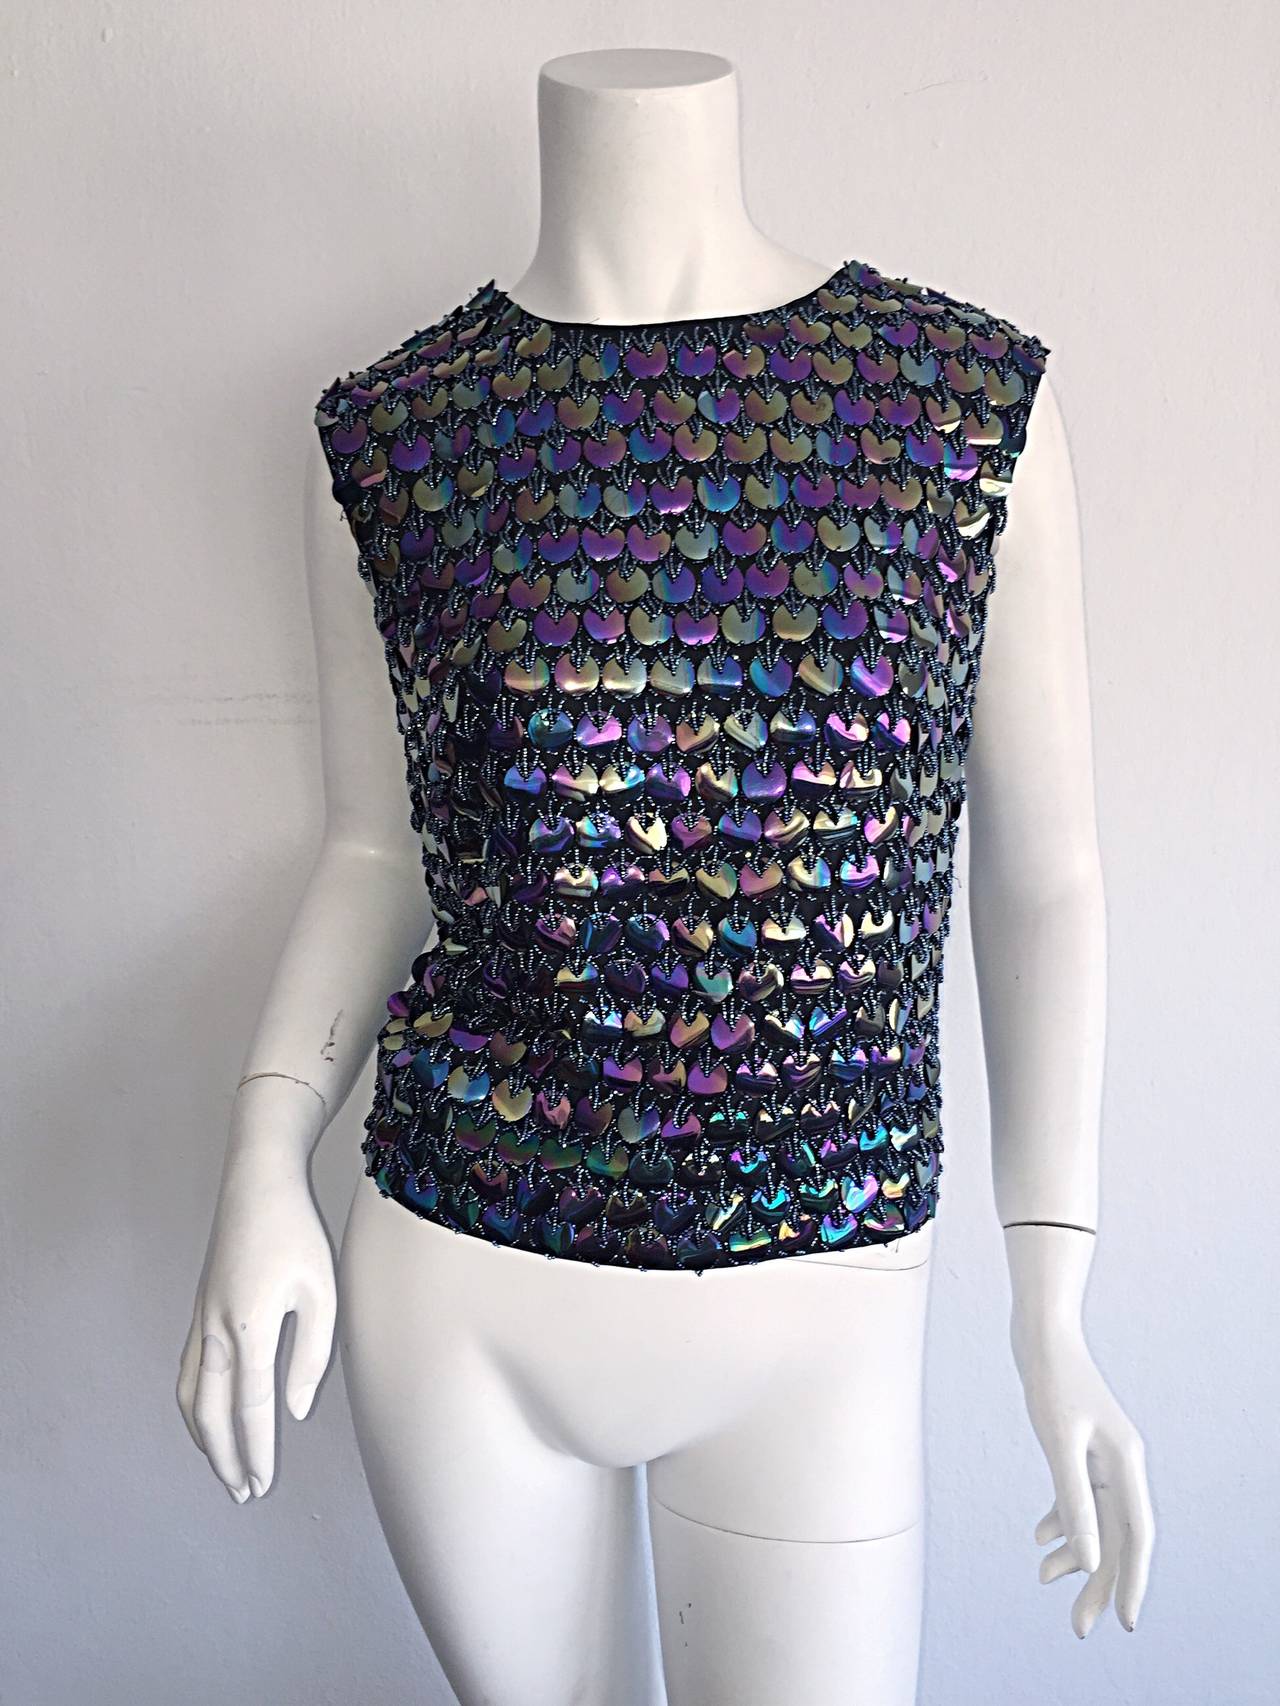 Fabulous 1950s Gene Shelly's silk beaded top!!! Fully hand sewn Paillettes and seed beads throughout, with a full metal zipper on the back. A true work of art! 100% black silk. Extremely versatile; can easily be dressed up or down. Looks great with